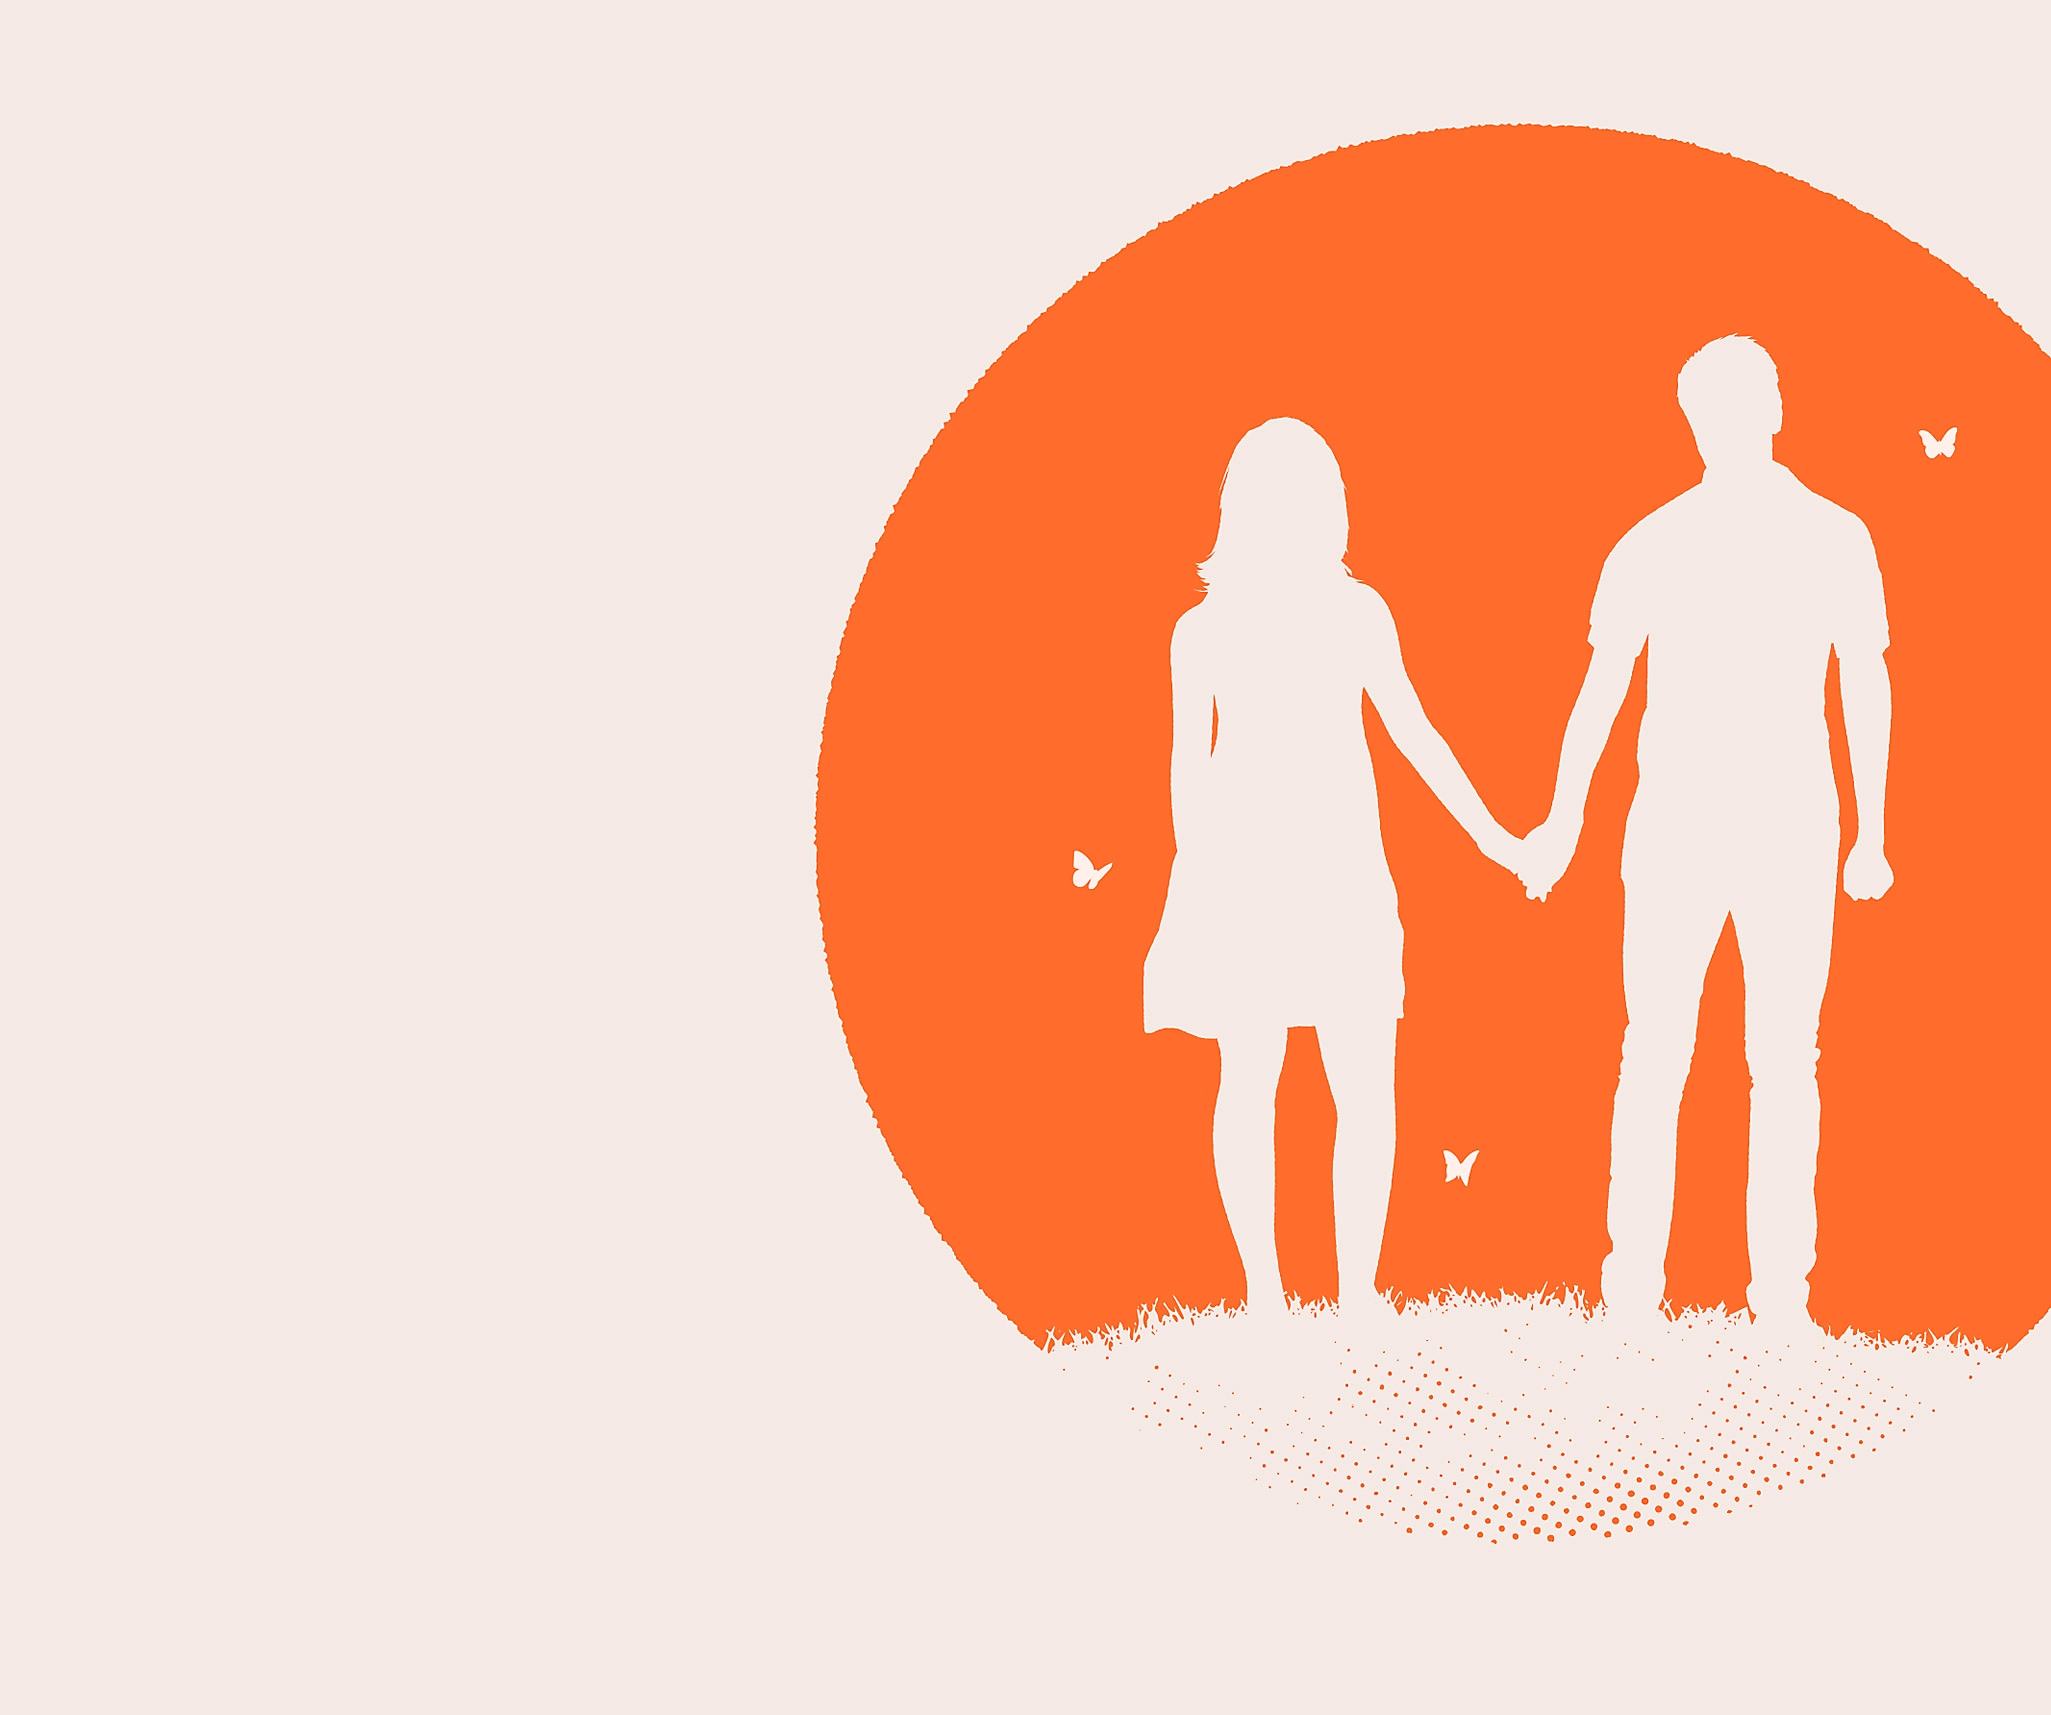 Everybody's Gone to the Rapture key art featuring a man and a women silhouetted in white against an orange circle.